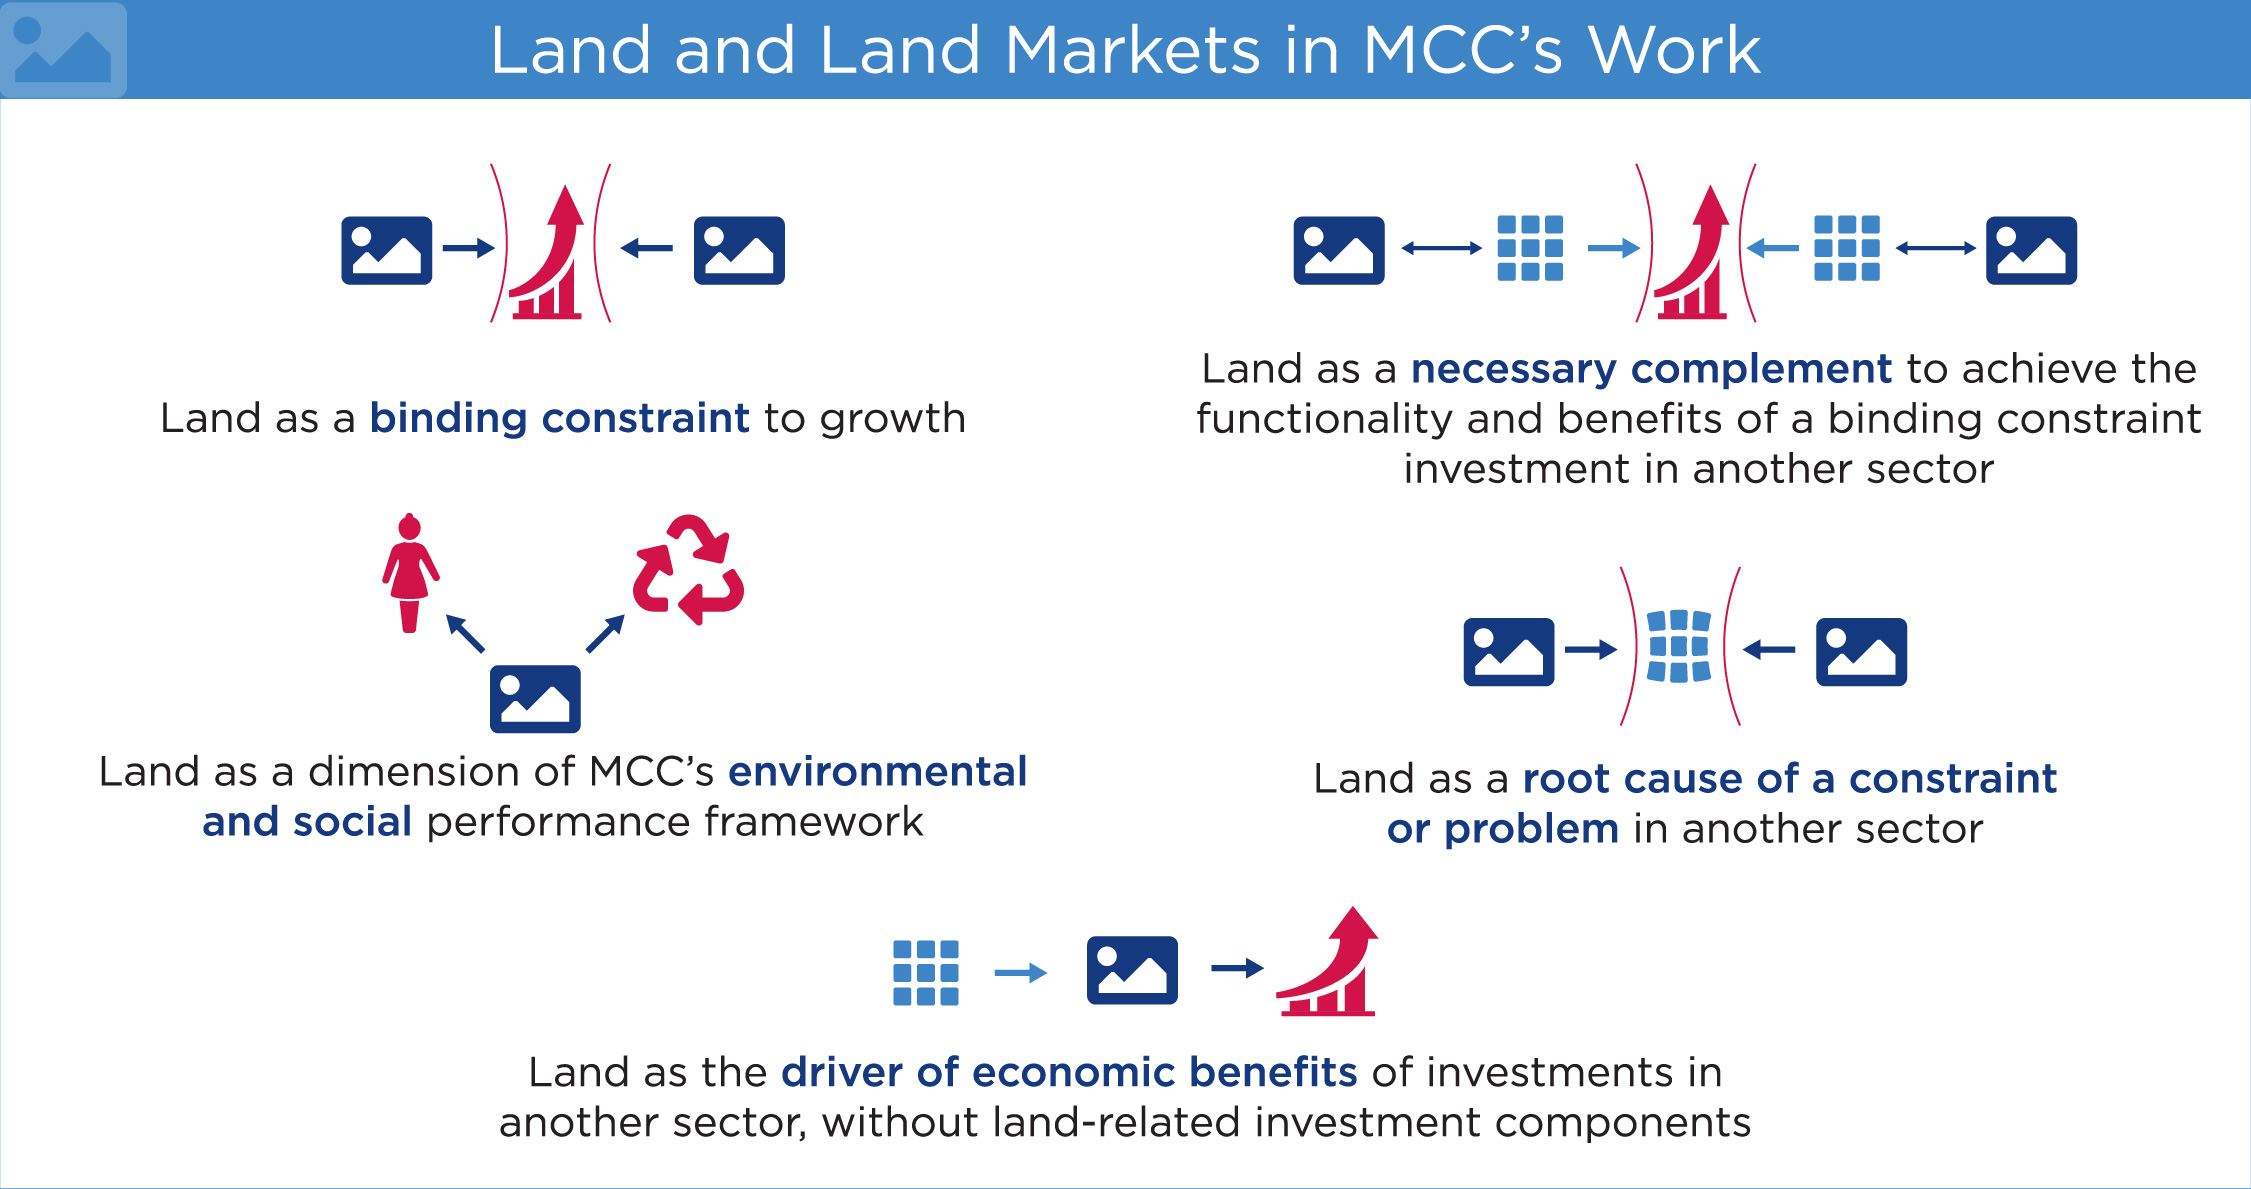 The 5 ways land and land markets typically appear in MCC’s work